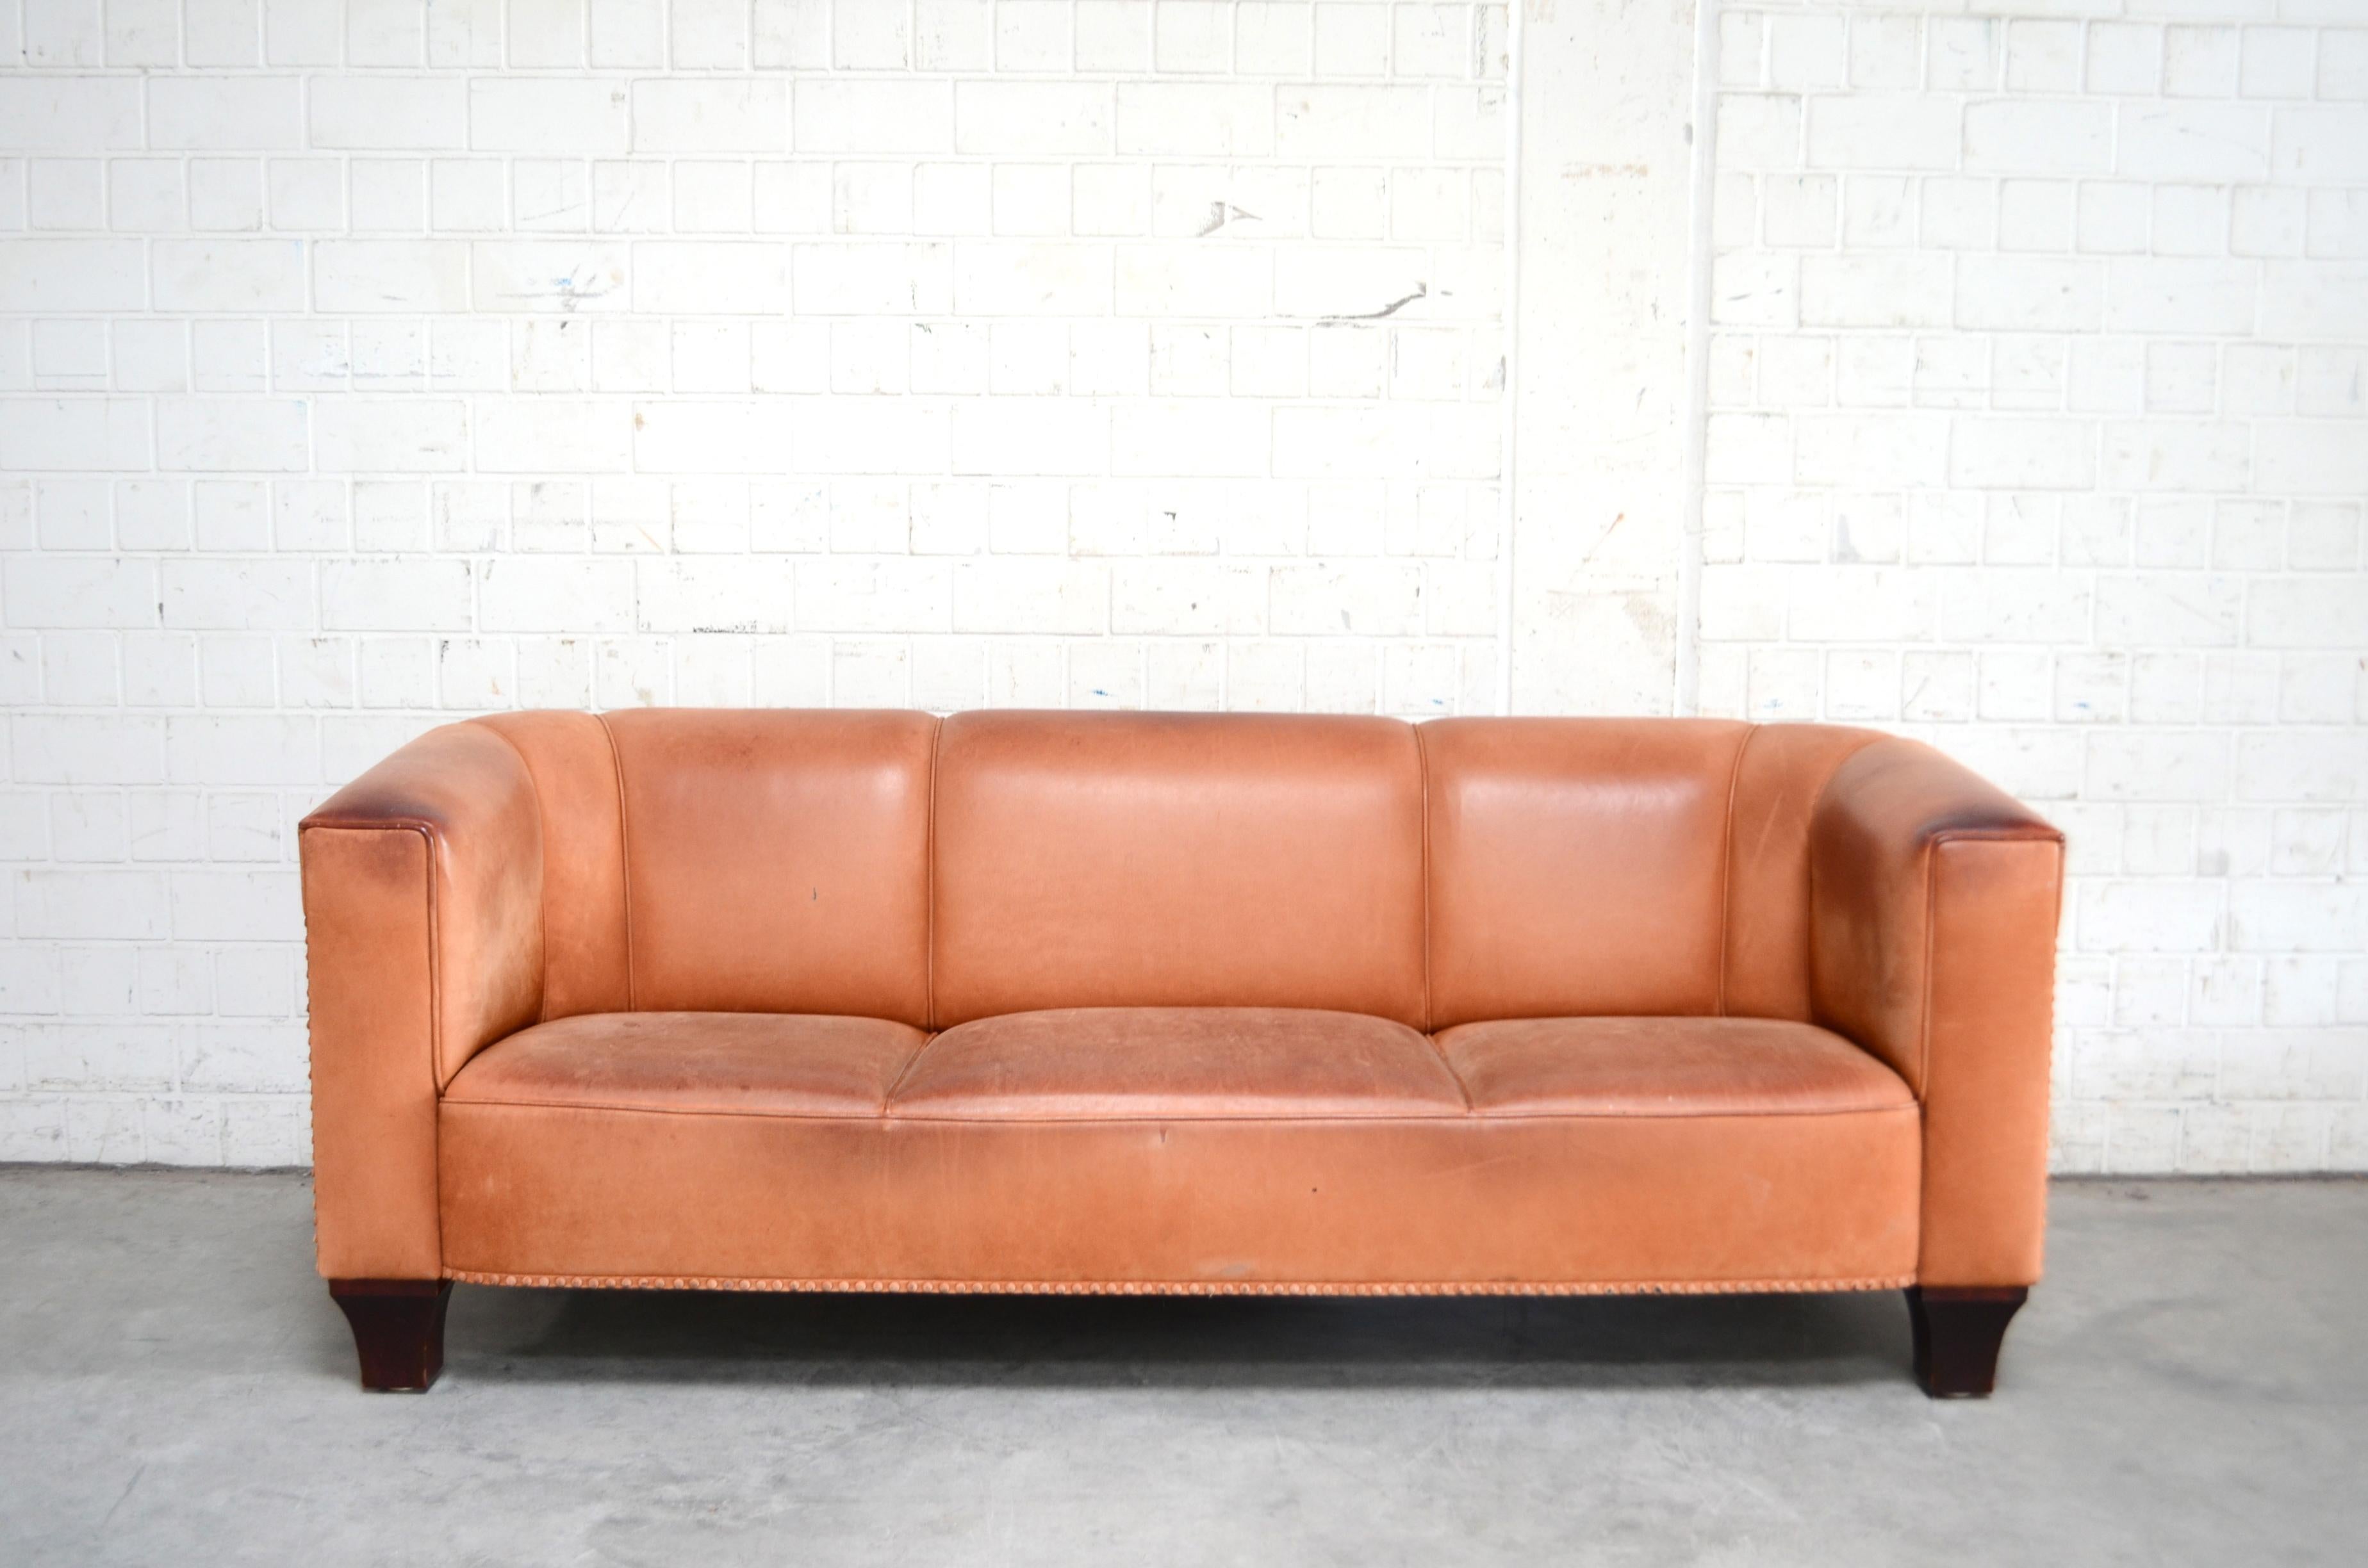 From Austrian designer Josef Hoffmann comes this great Palais Stoclet Sofa.
Design year between 1905-1911 through the time of Art Nouveau and Vienna Secession for the mansion Palais Stoclet in Brussels Belgium.
This Sofa was produced in the